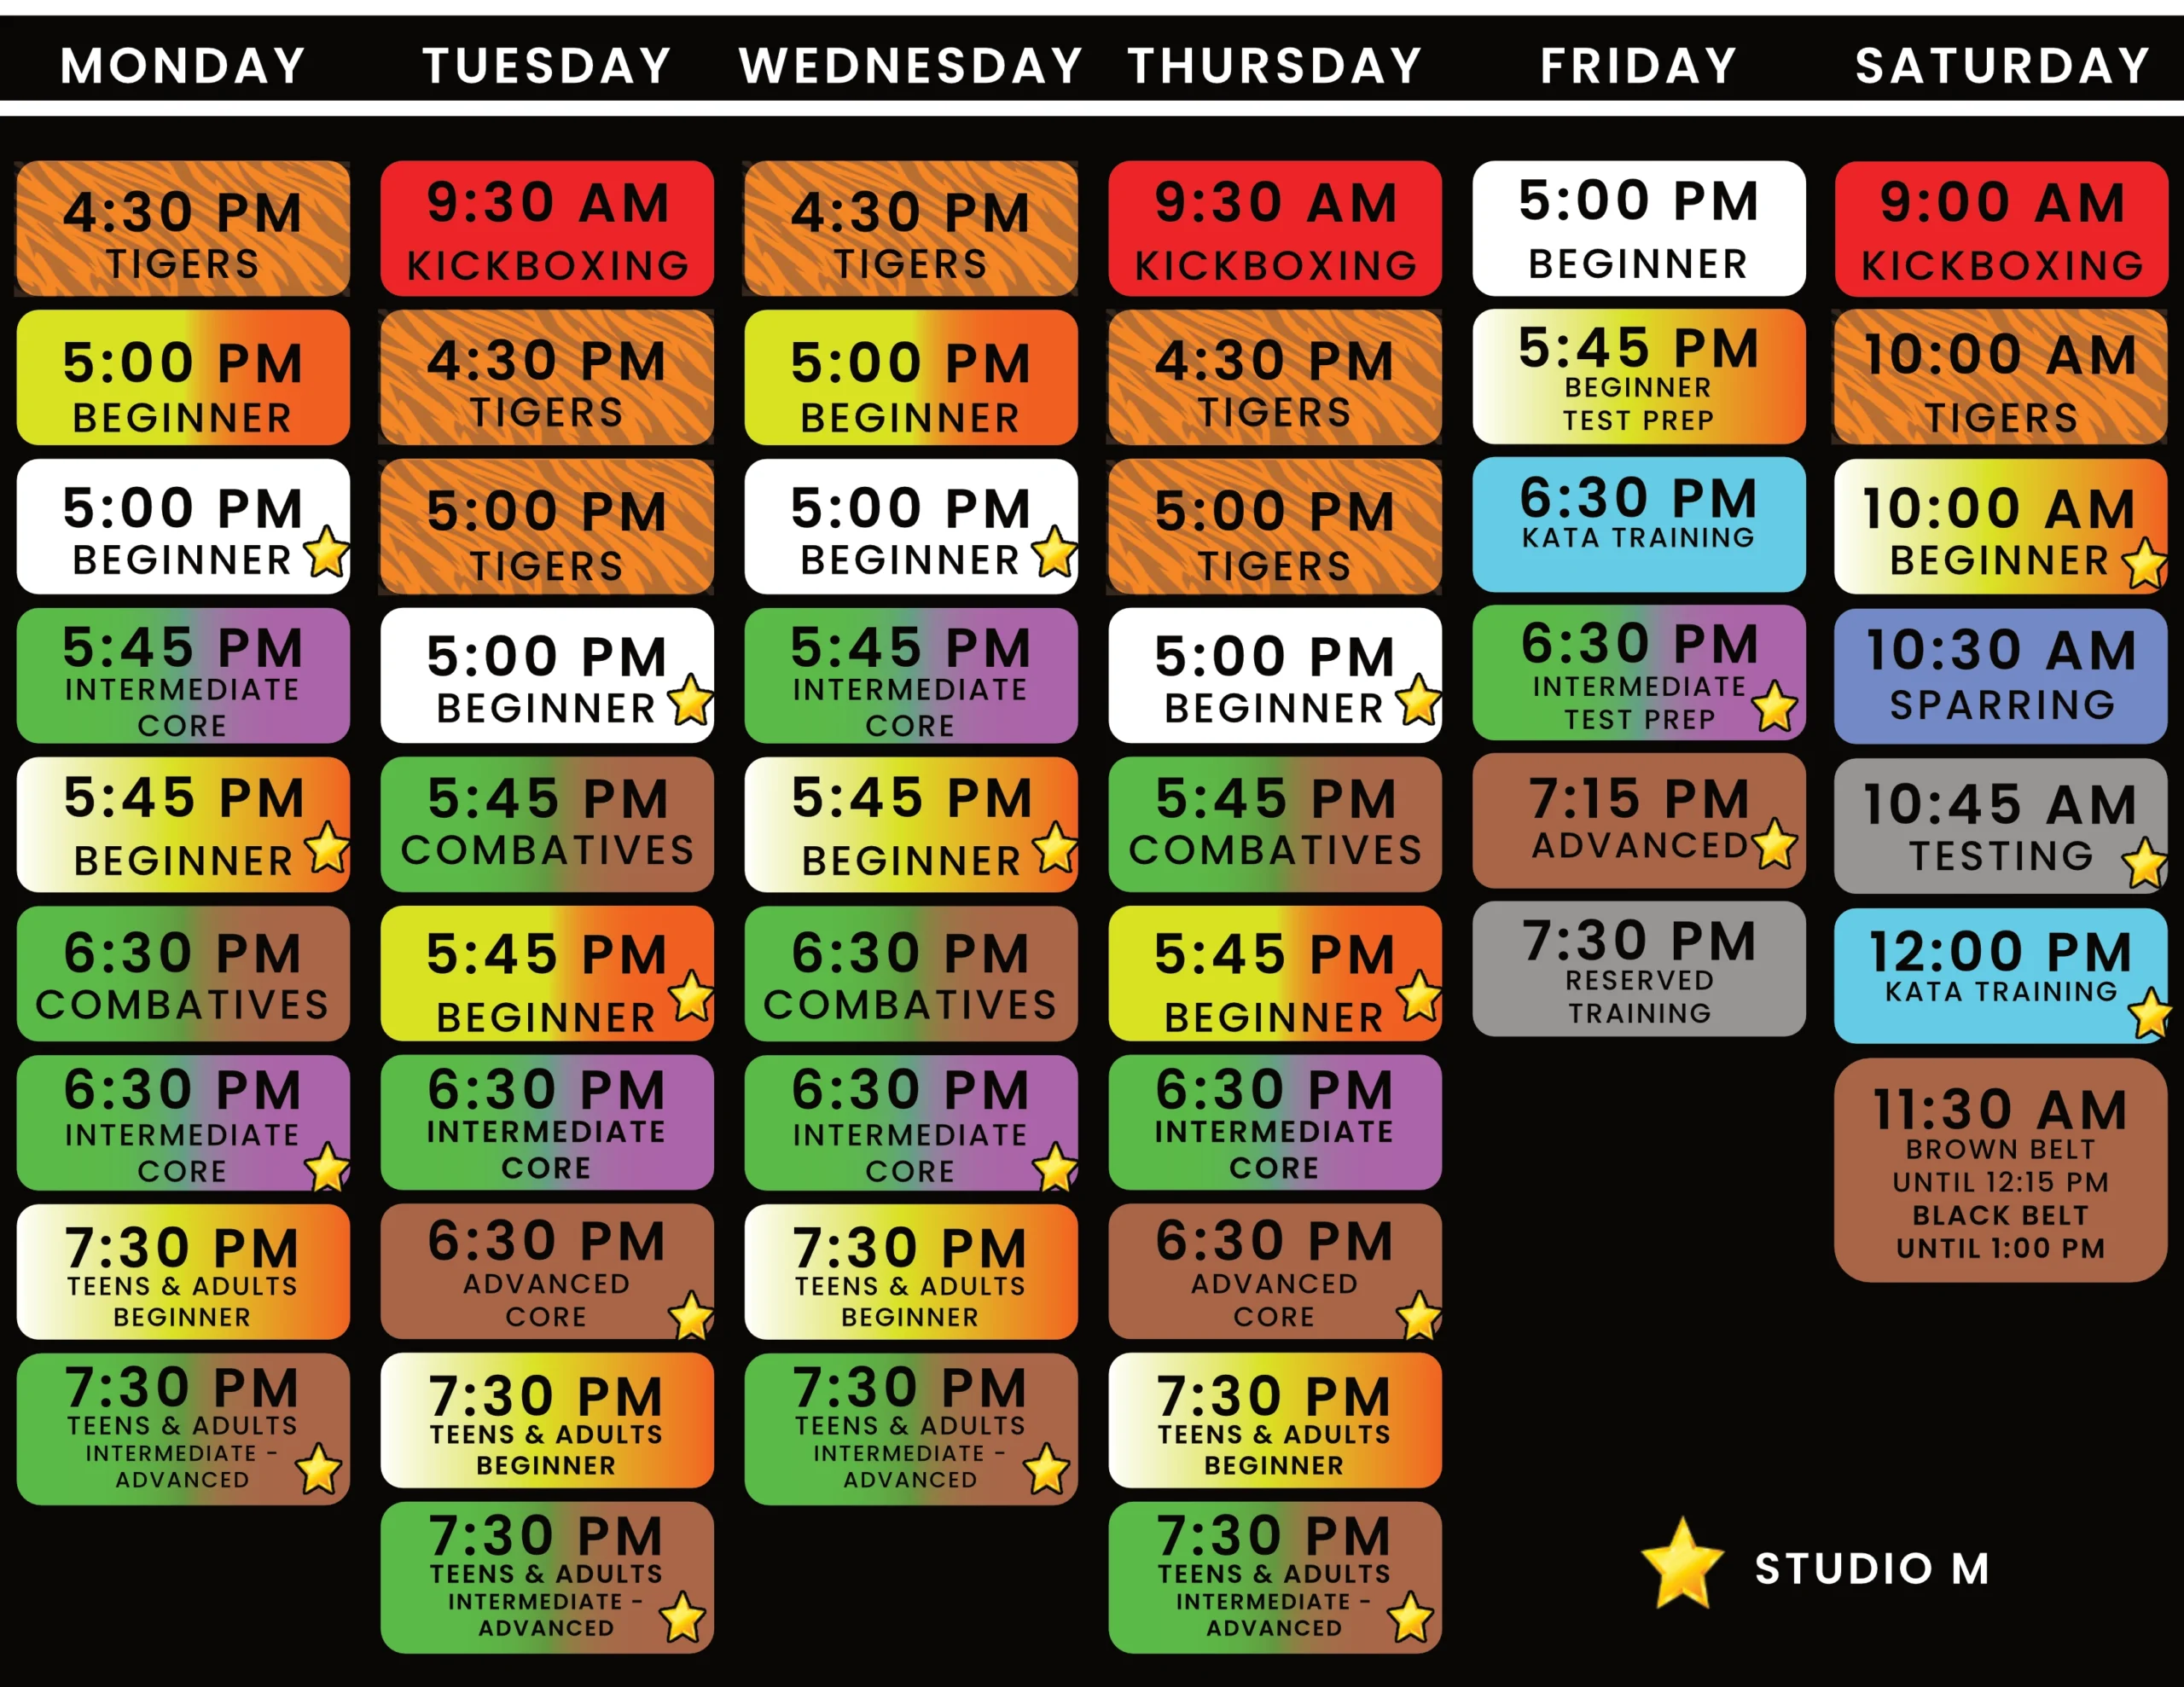 Click here for a large view of the static schedule